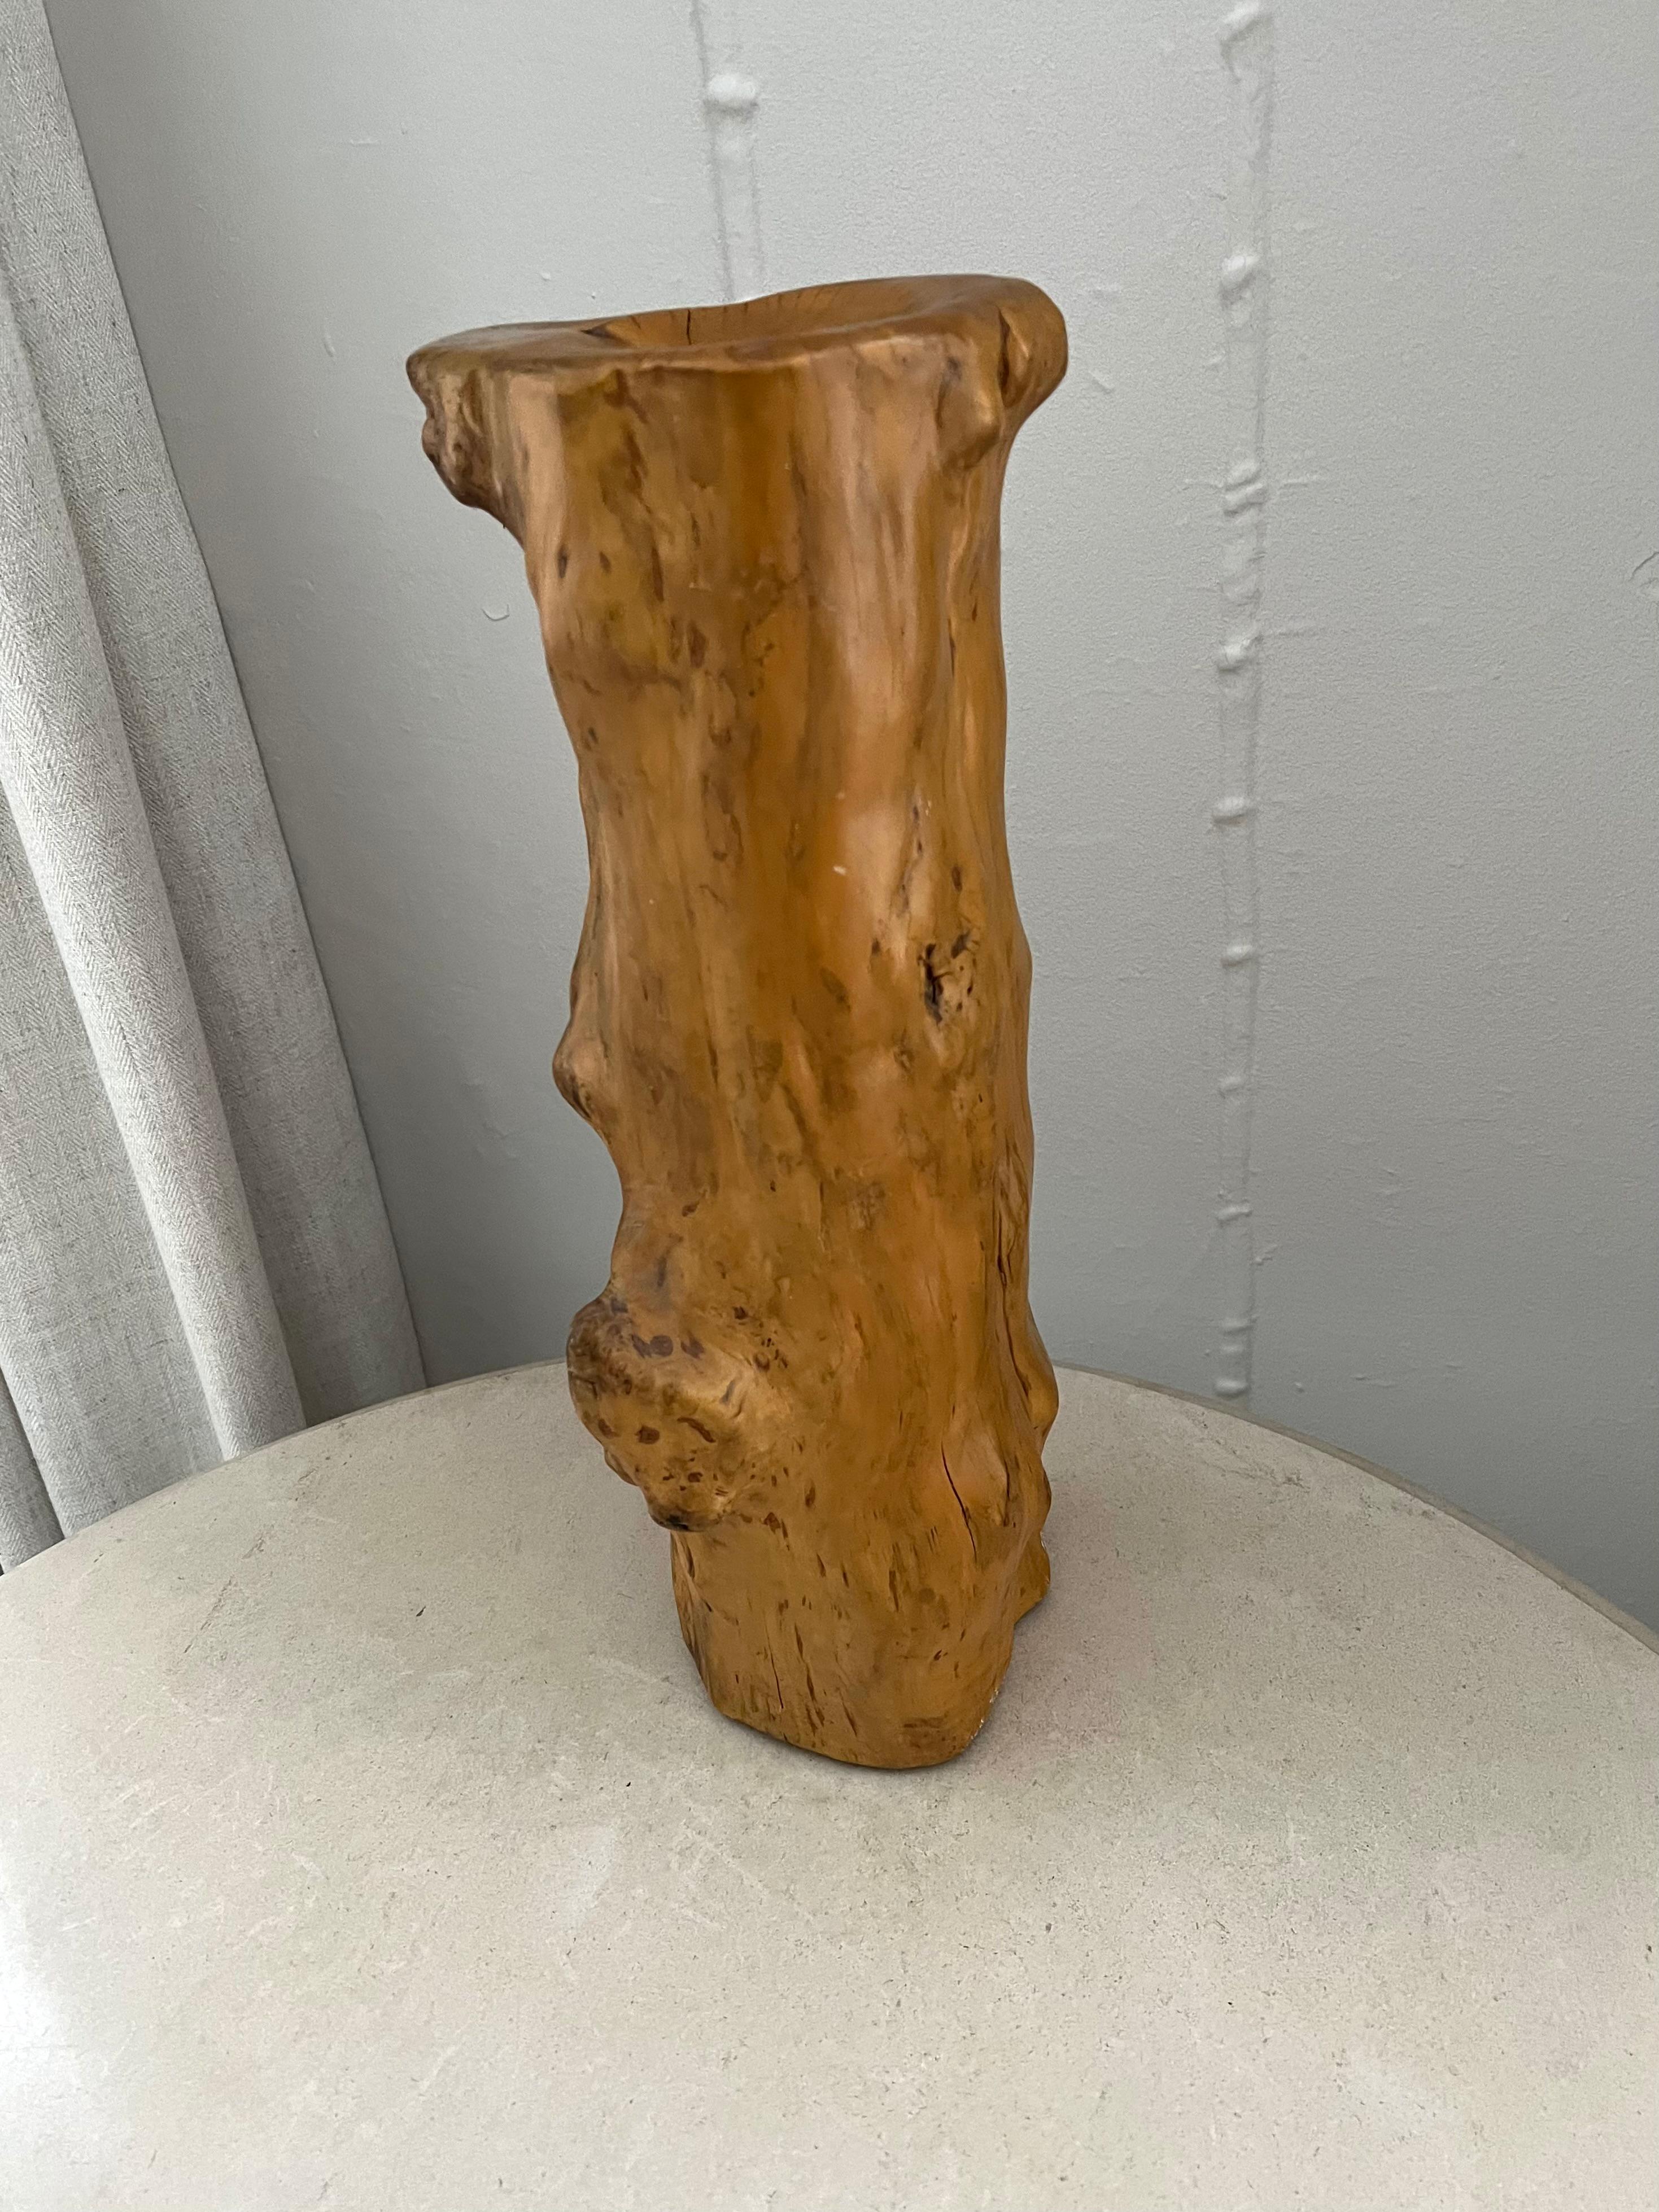 Driftwood Accent Vase or Decorative Piece In Good Condition For Sale In Los Angeles, CA